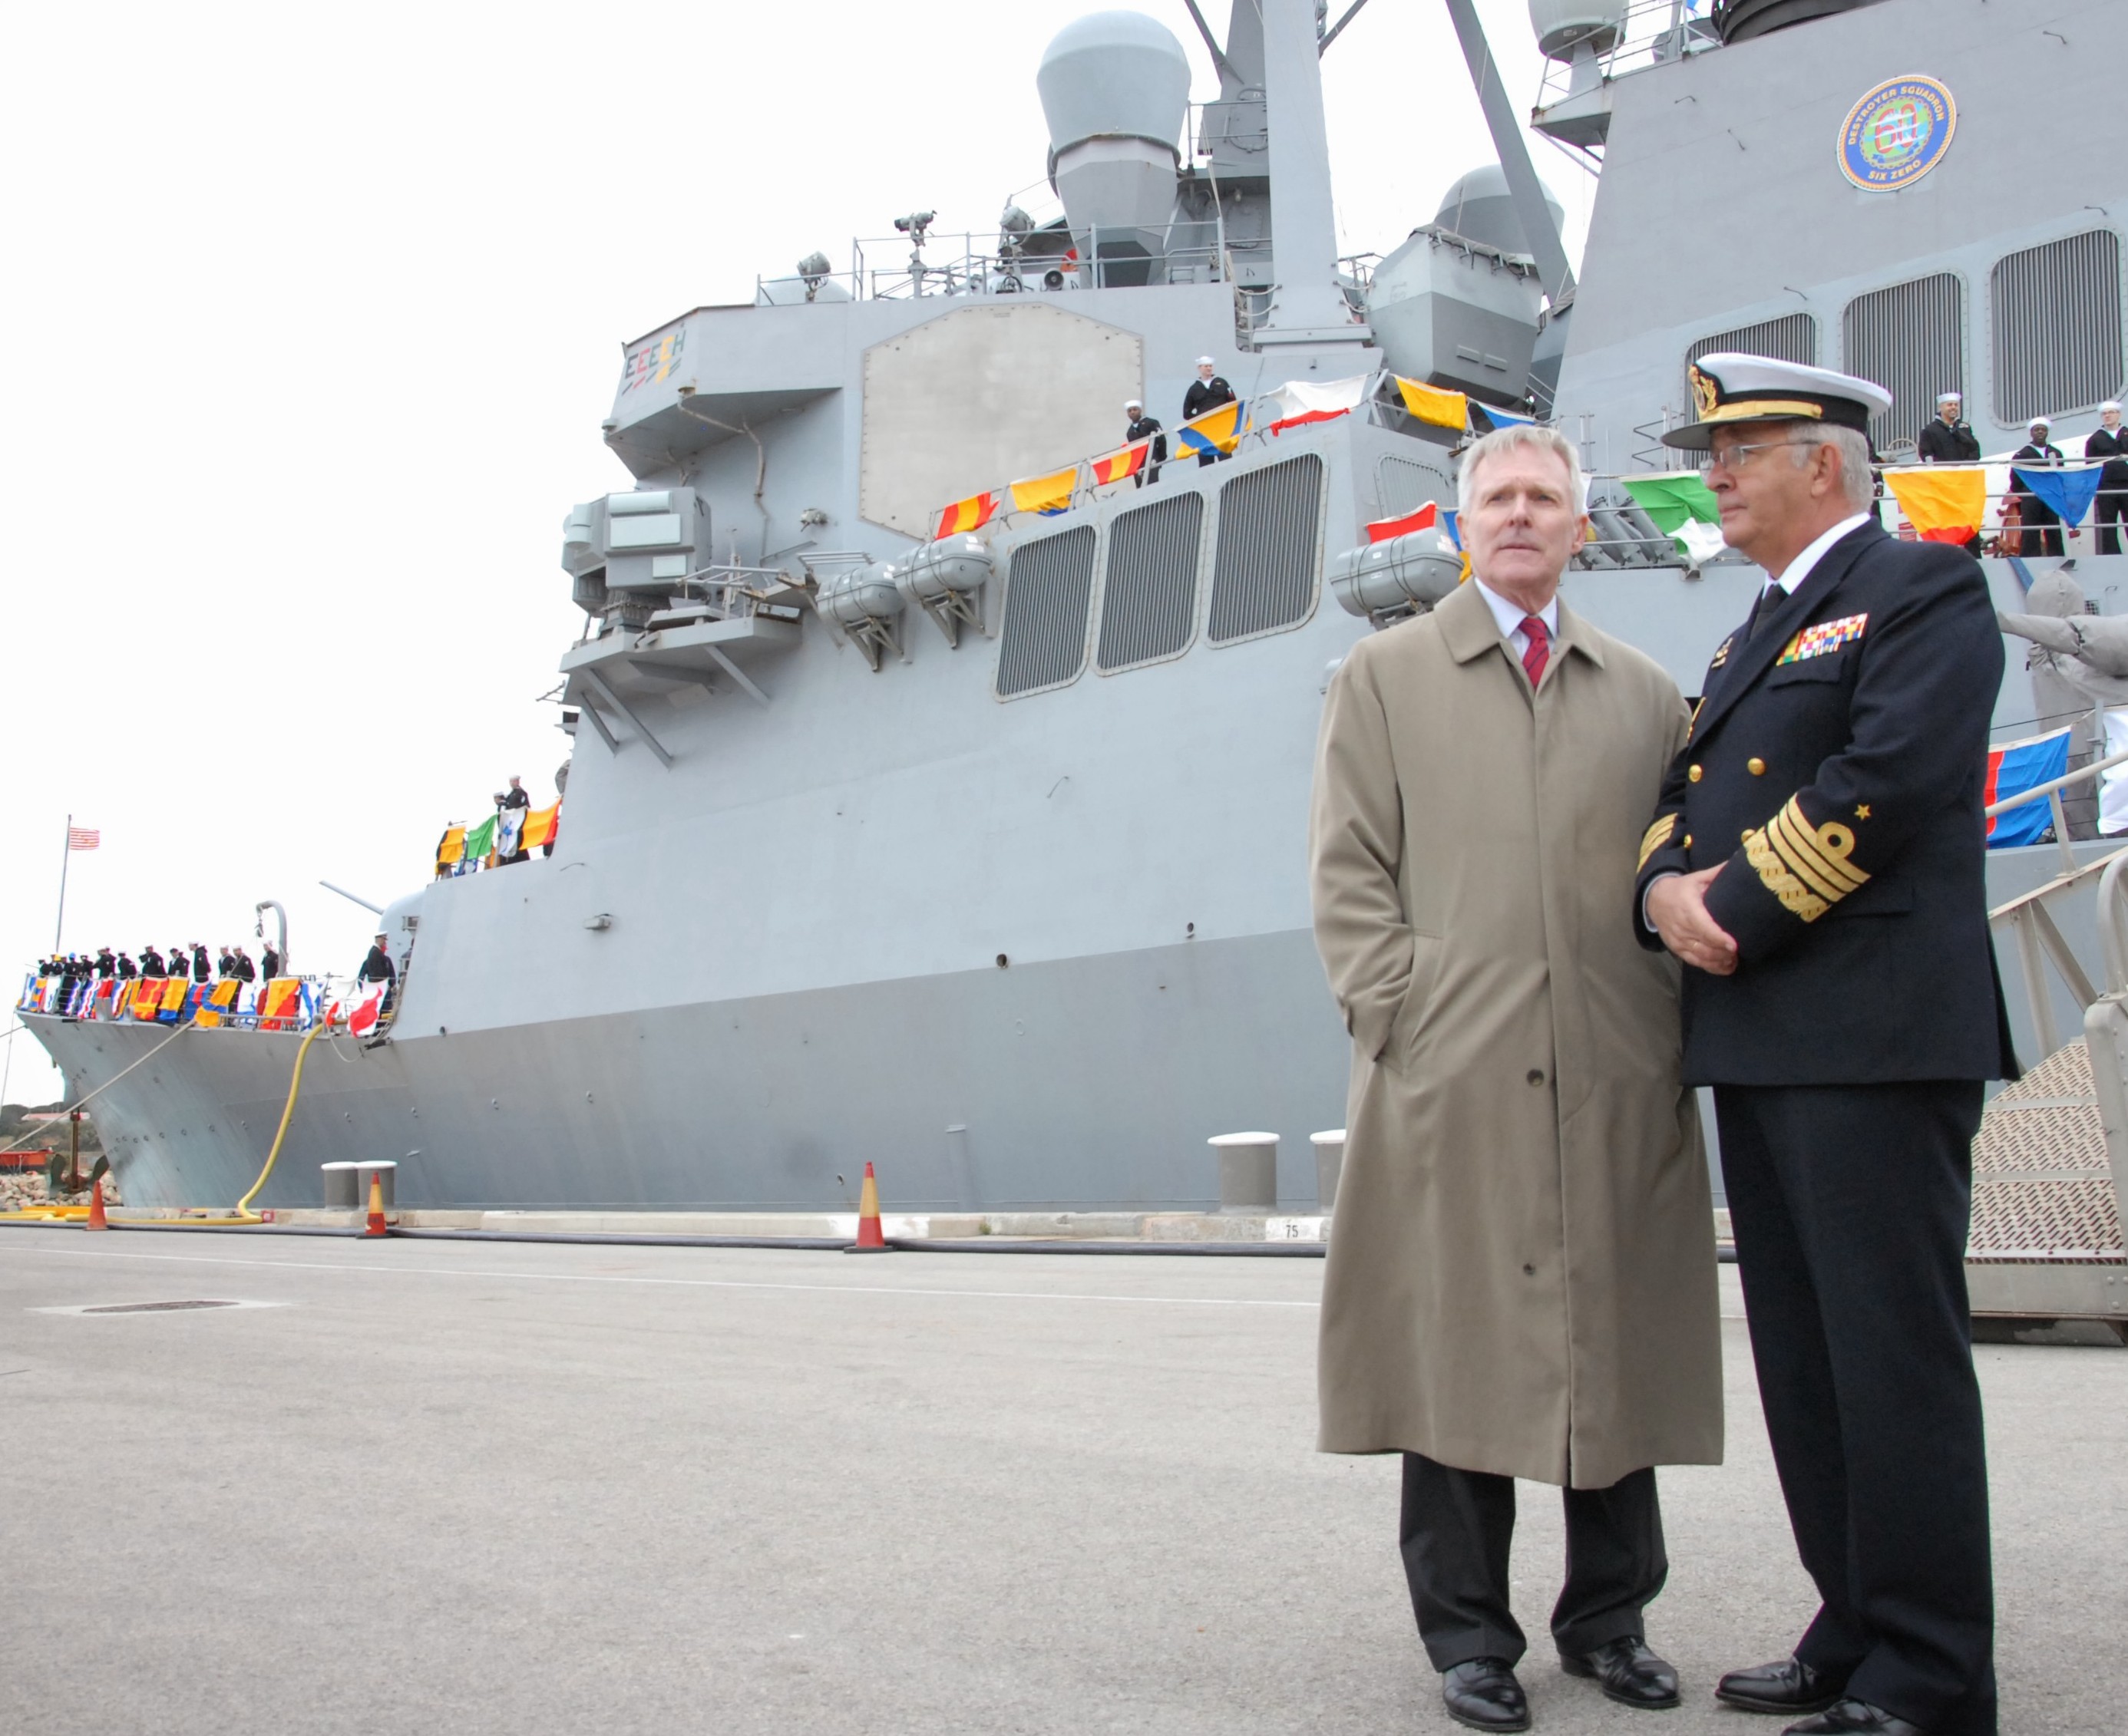 Secretary of the Navy Ray Mabus, left, speaks with Spanish Chief of Naval Staff Adm. Jaime MuÒoz-Delgado y Diaz del Rio following the arrival of the Arleigh Burke-class guided-missile destroyer USS Donald Cook (DDG-75) at Naval Station Rota, Spain on Feb. 11, 2014. US Navy Photo